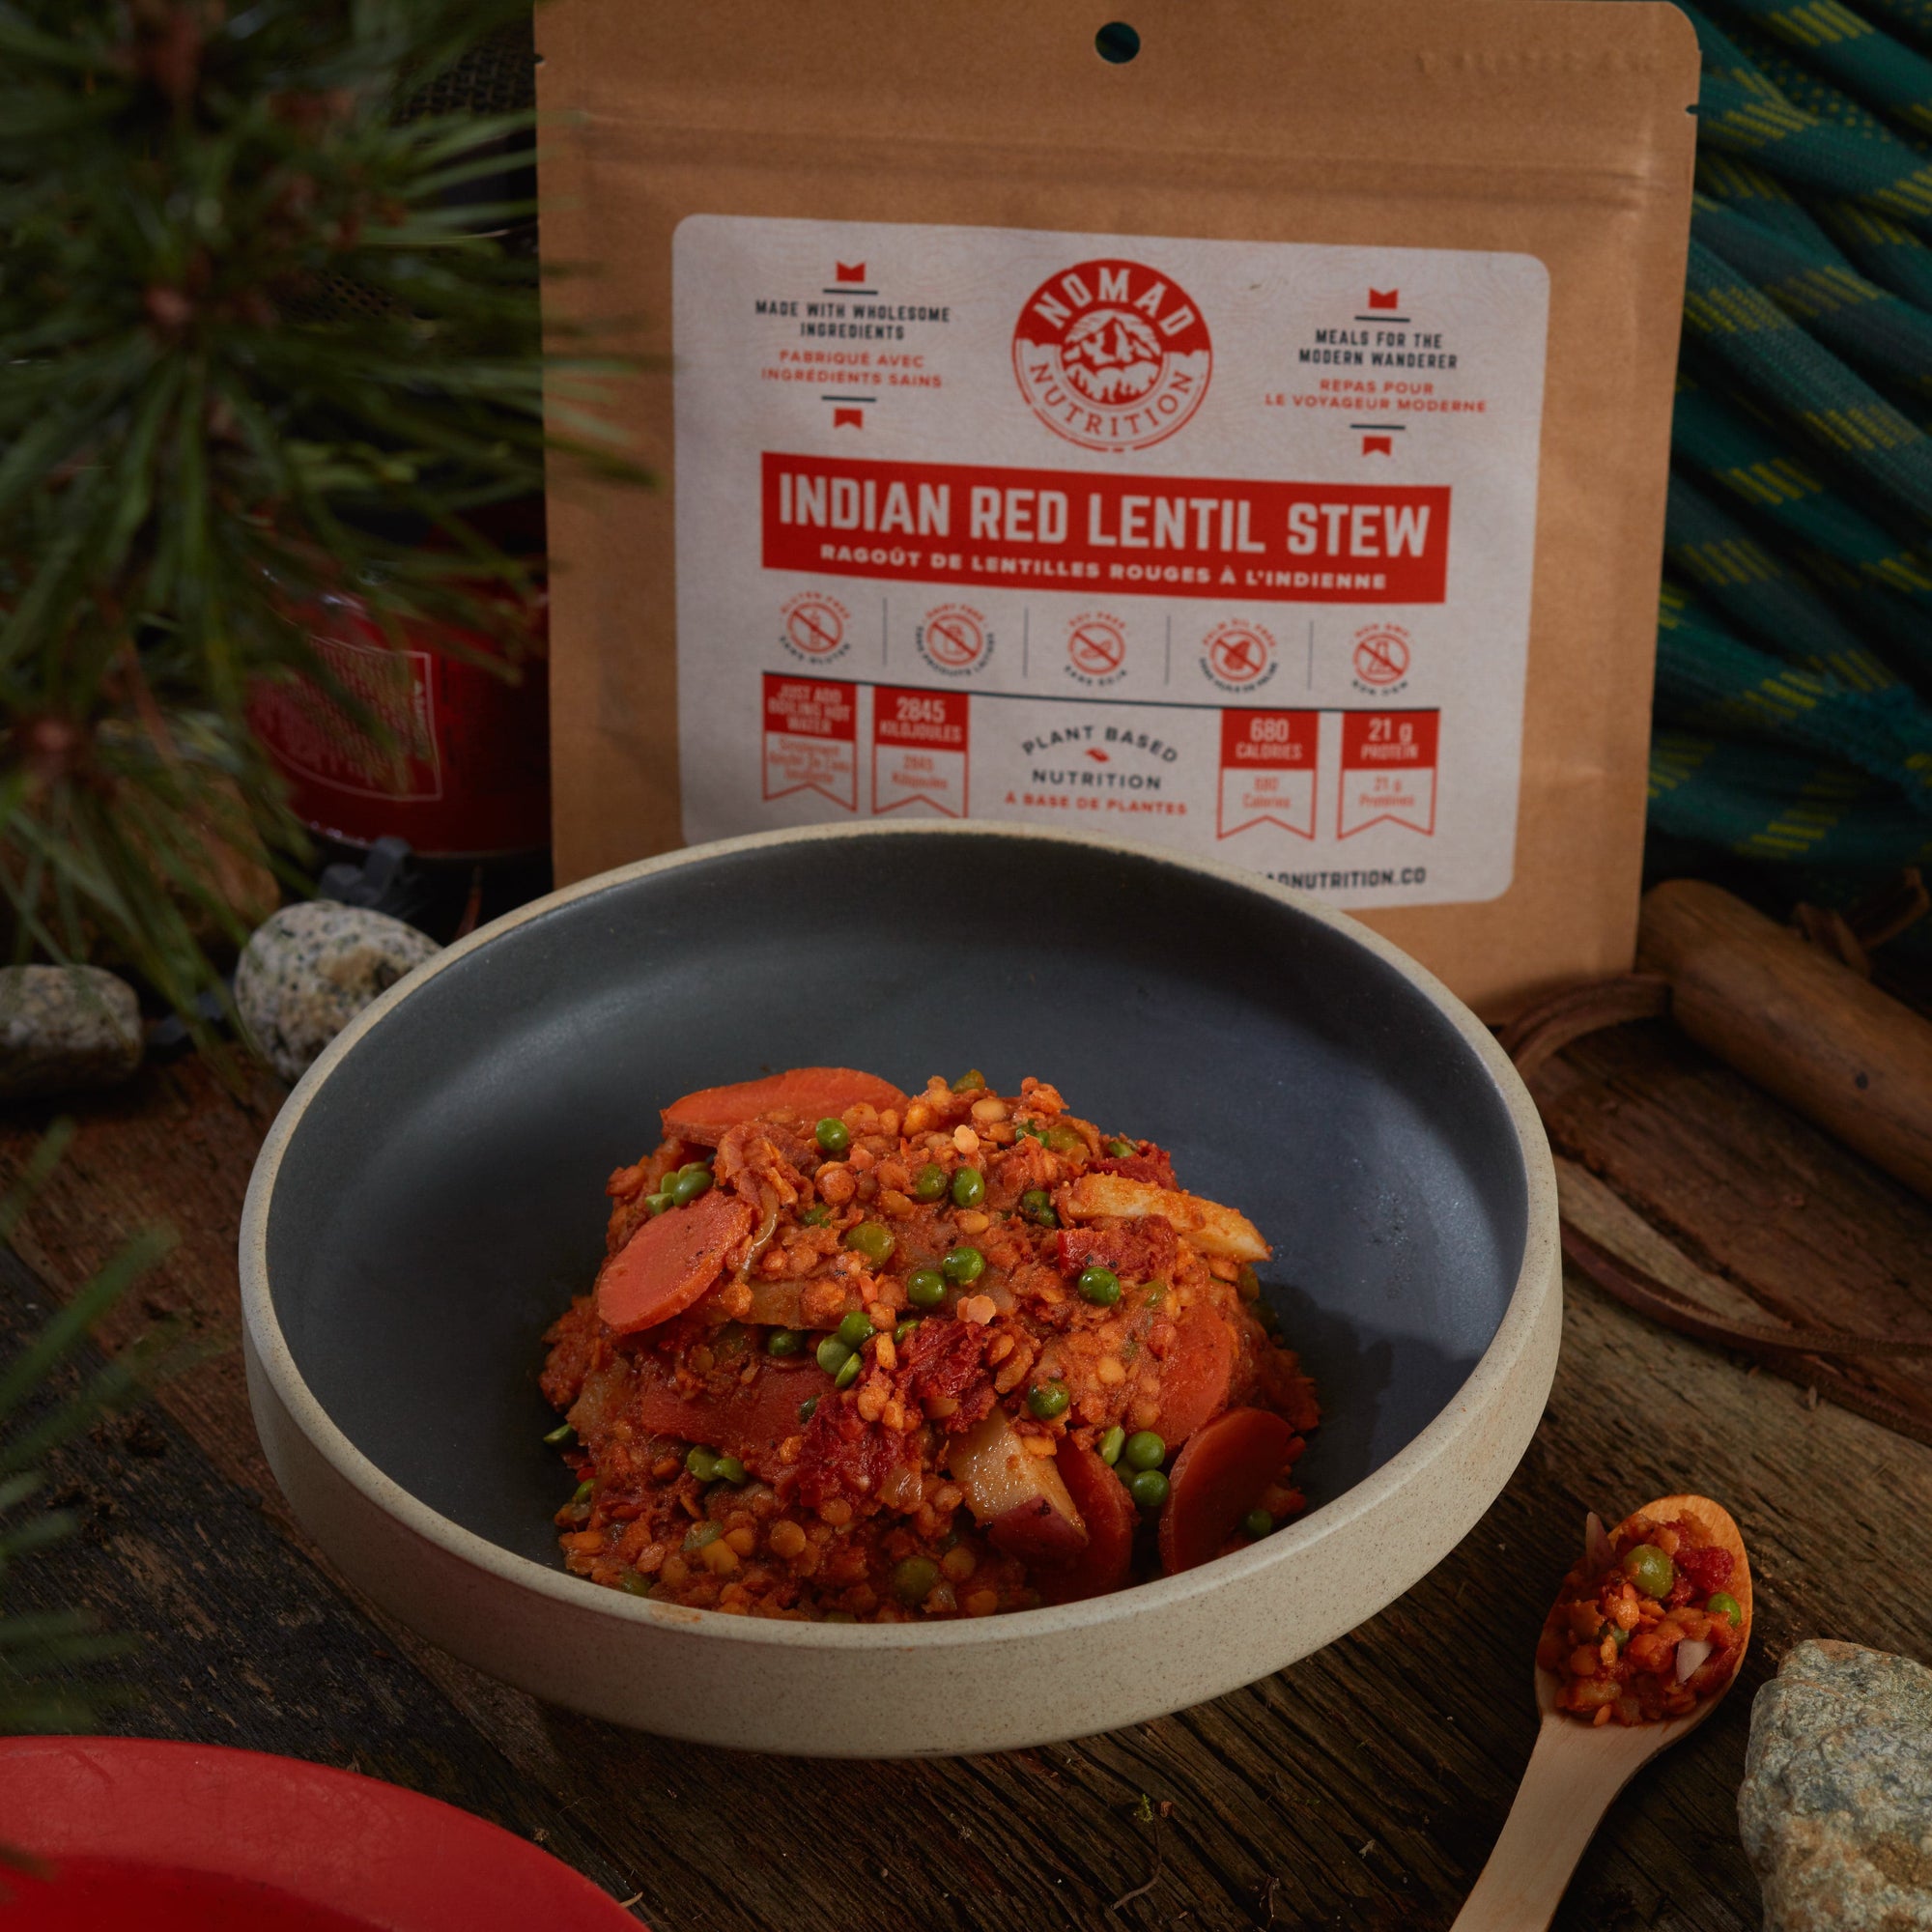 Rehydrated Nomad Nutrition Indian Red Lentil Stew in a bowl with 112g meal size on table top outdoors. No additional cooking required.